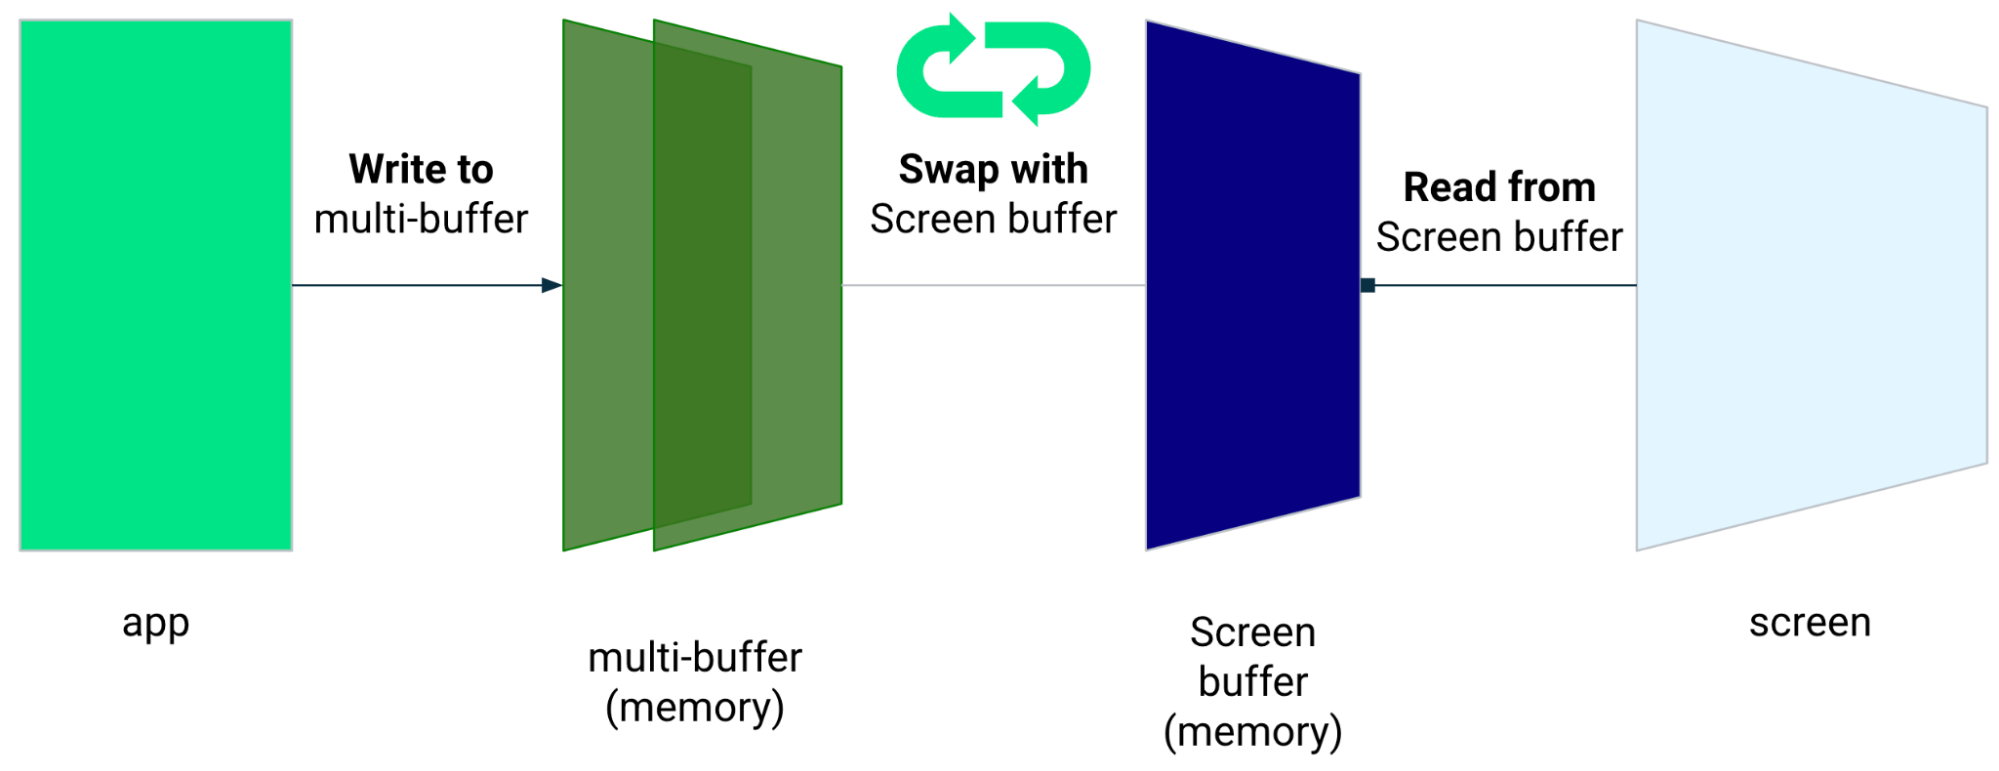 App writes to multi-buffer, which swaps with screen buffer. App reads from screen buffer.